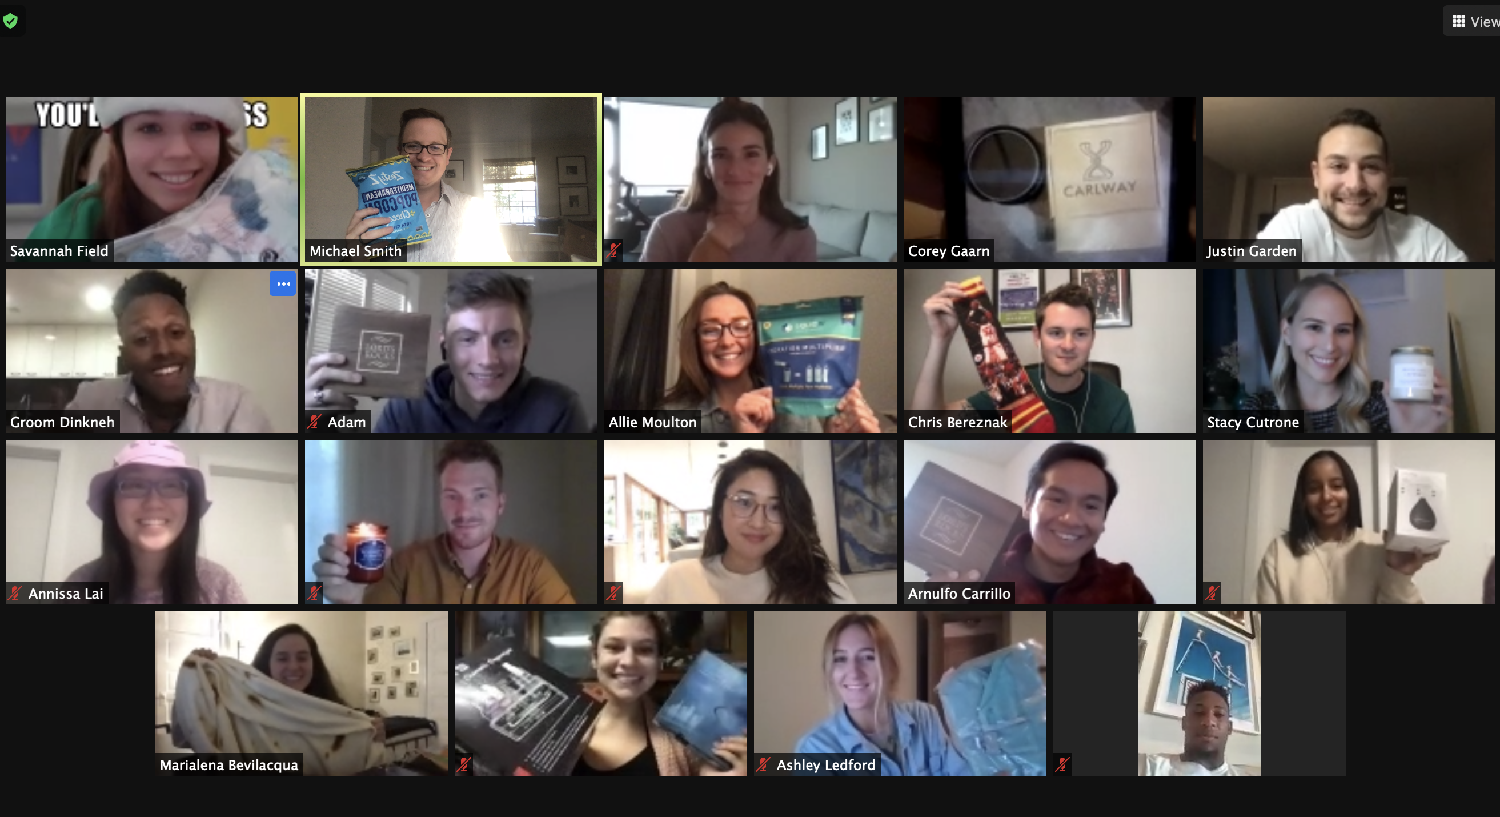 Pivoting to full-time remote work in 2020 wasn't a concern; we've creatively navigated team building remotely! 